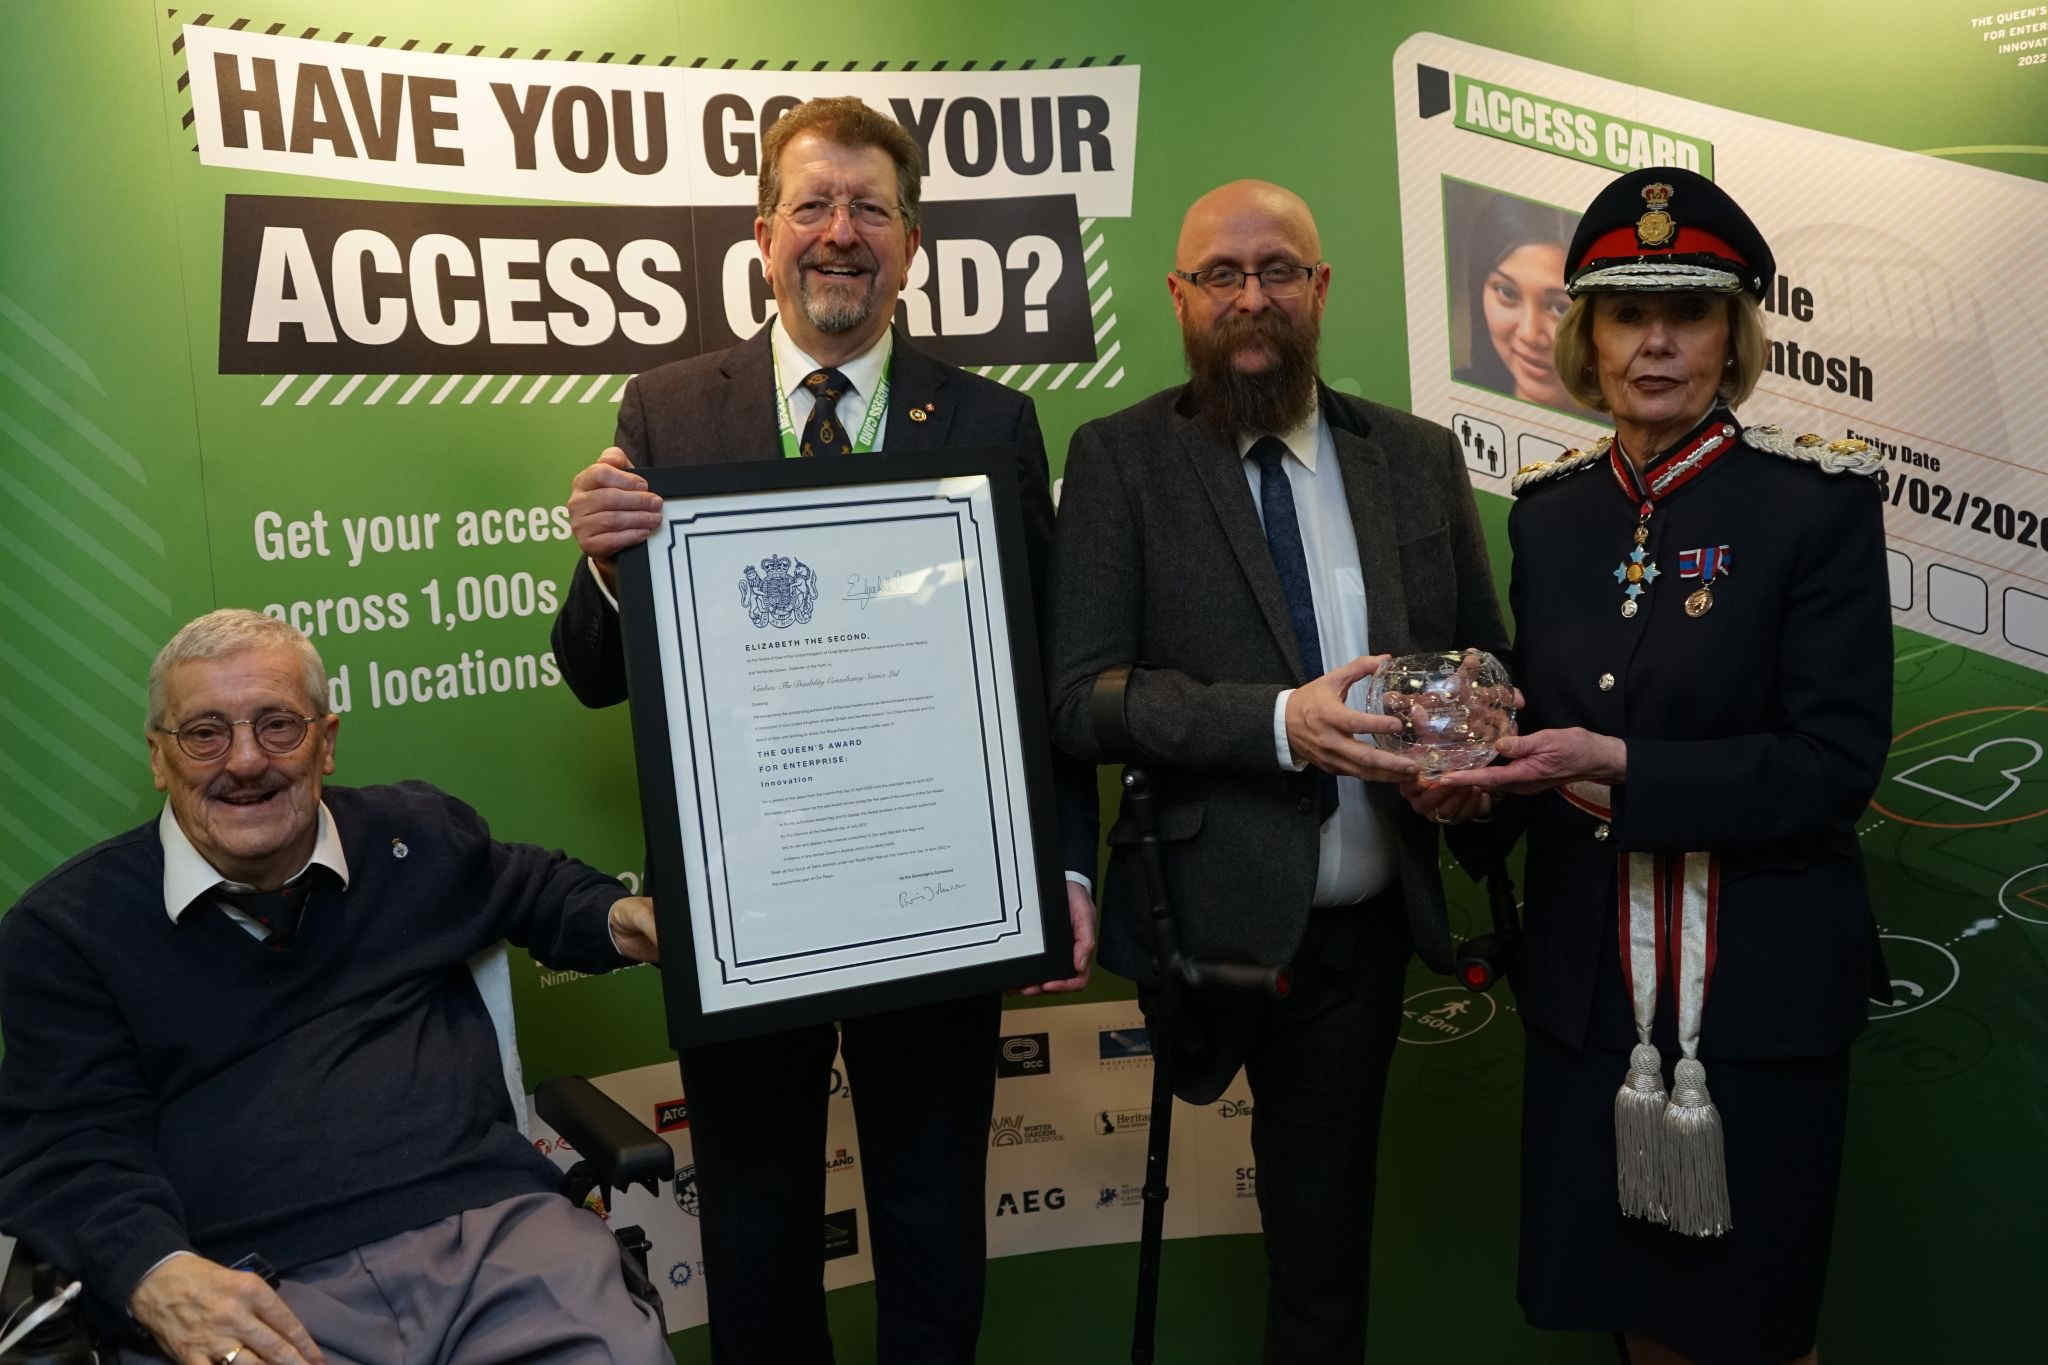 Team photo of Nimbus Disability receiving The Queen's Awards for Enterprise: Innovation in 2022. From left to right: Nimbus Disability chairman Steve Rigby, deputy Lord Lieutenant Tony Walker, owner of Nimbus Disability Martin Austin, and Lord Lieutenant Elizabeth Fothergill.